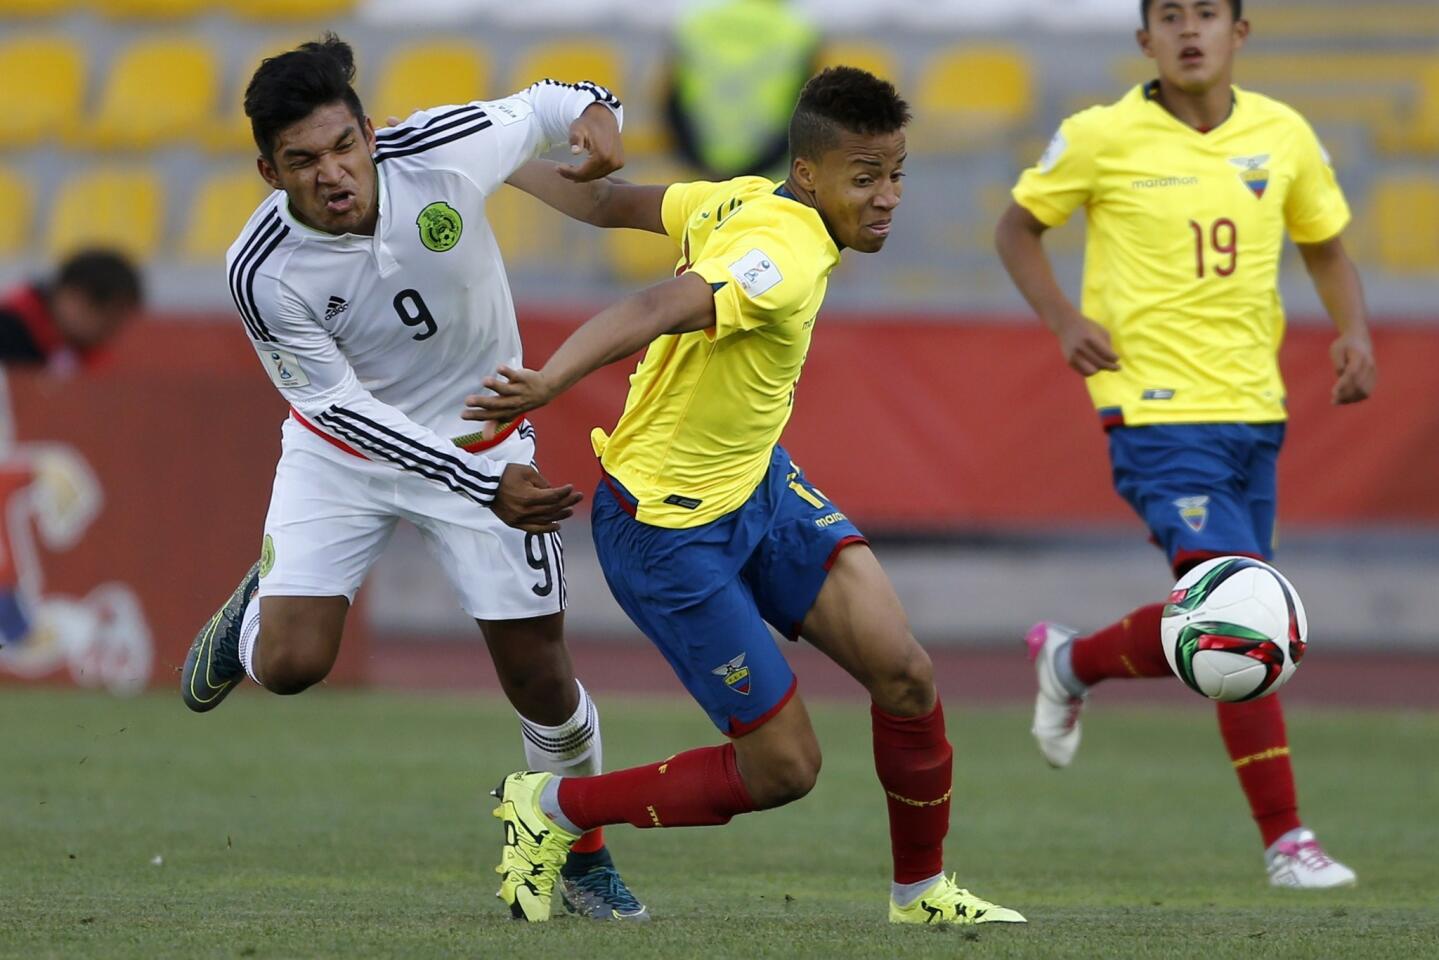 Ecuador's Byron Castillo (C) and Mexico's Eduardo Aguirre vie for the ball during their U-17 WC football match at the Francisco Sánchez Rumoroso stadium in Coquimbo, Chile, on November 2, 2015. AFP PHOTO/Andres Pina/PhotosportANDRES PINA/AFP/Getty Images ** OUTS - ELSENT, FPG, CM - OUTS * NM, PH, VA if sourced by CT, LA or MoD **